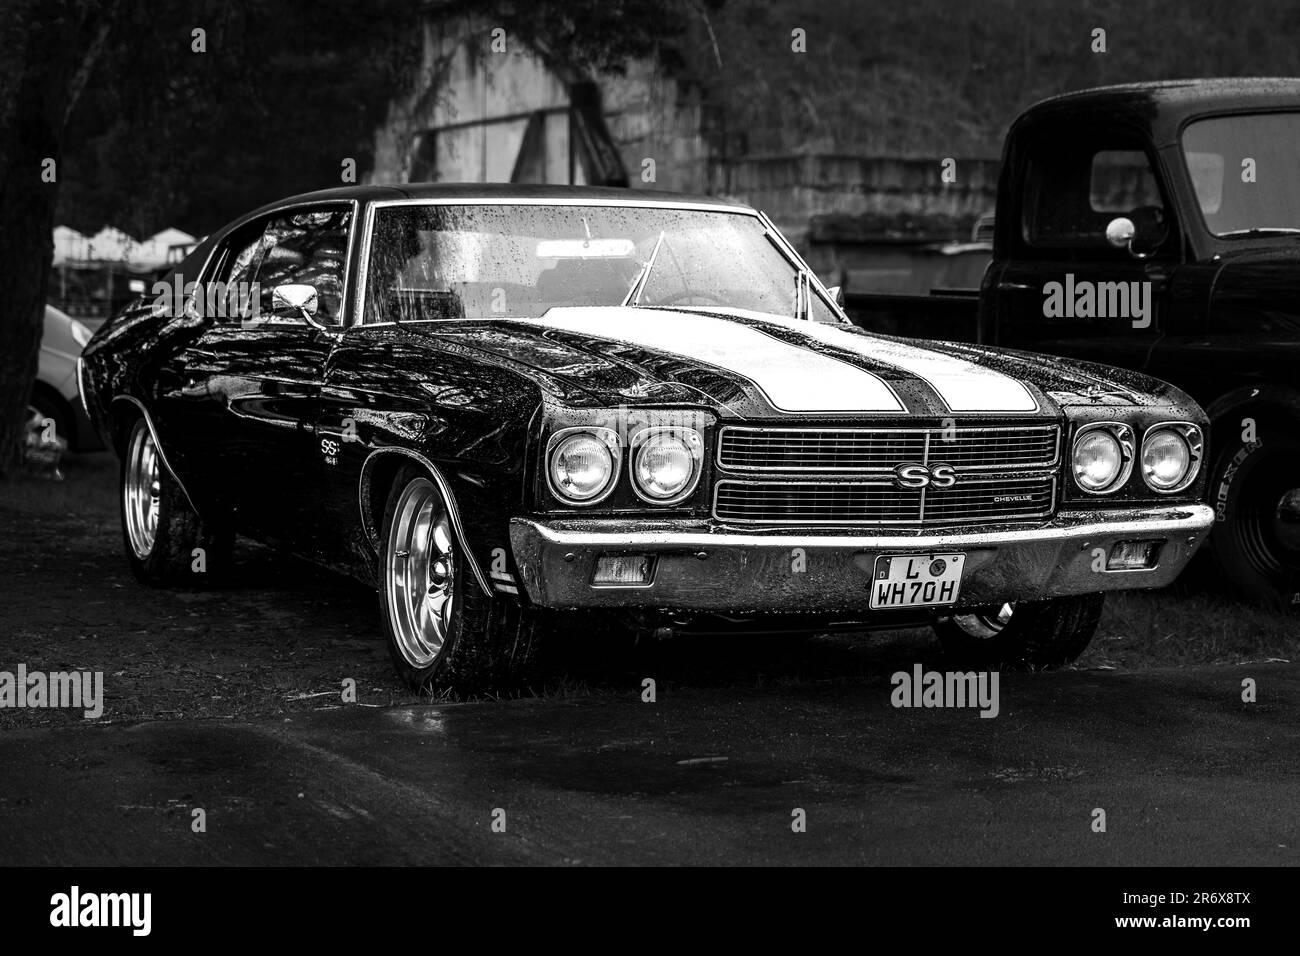 FINOWFURT, GERMANY - MAY 06, 2023: The mid-size car Chevrolet Chevelle Hardtop Coupe, 1970. Black and white. Race festival 2023. Season opening. Stock Photo